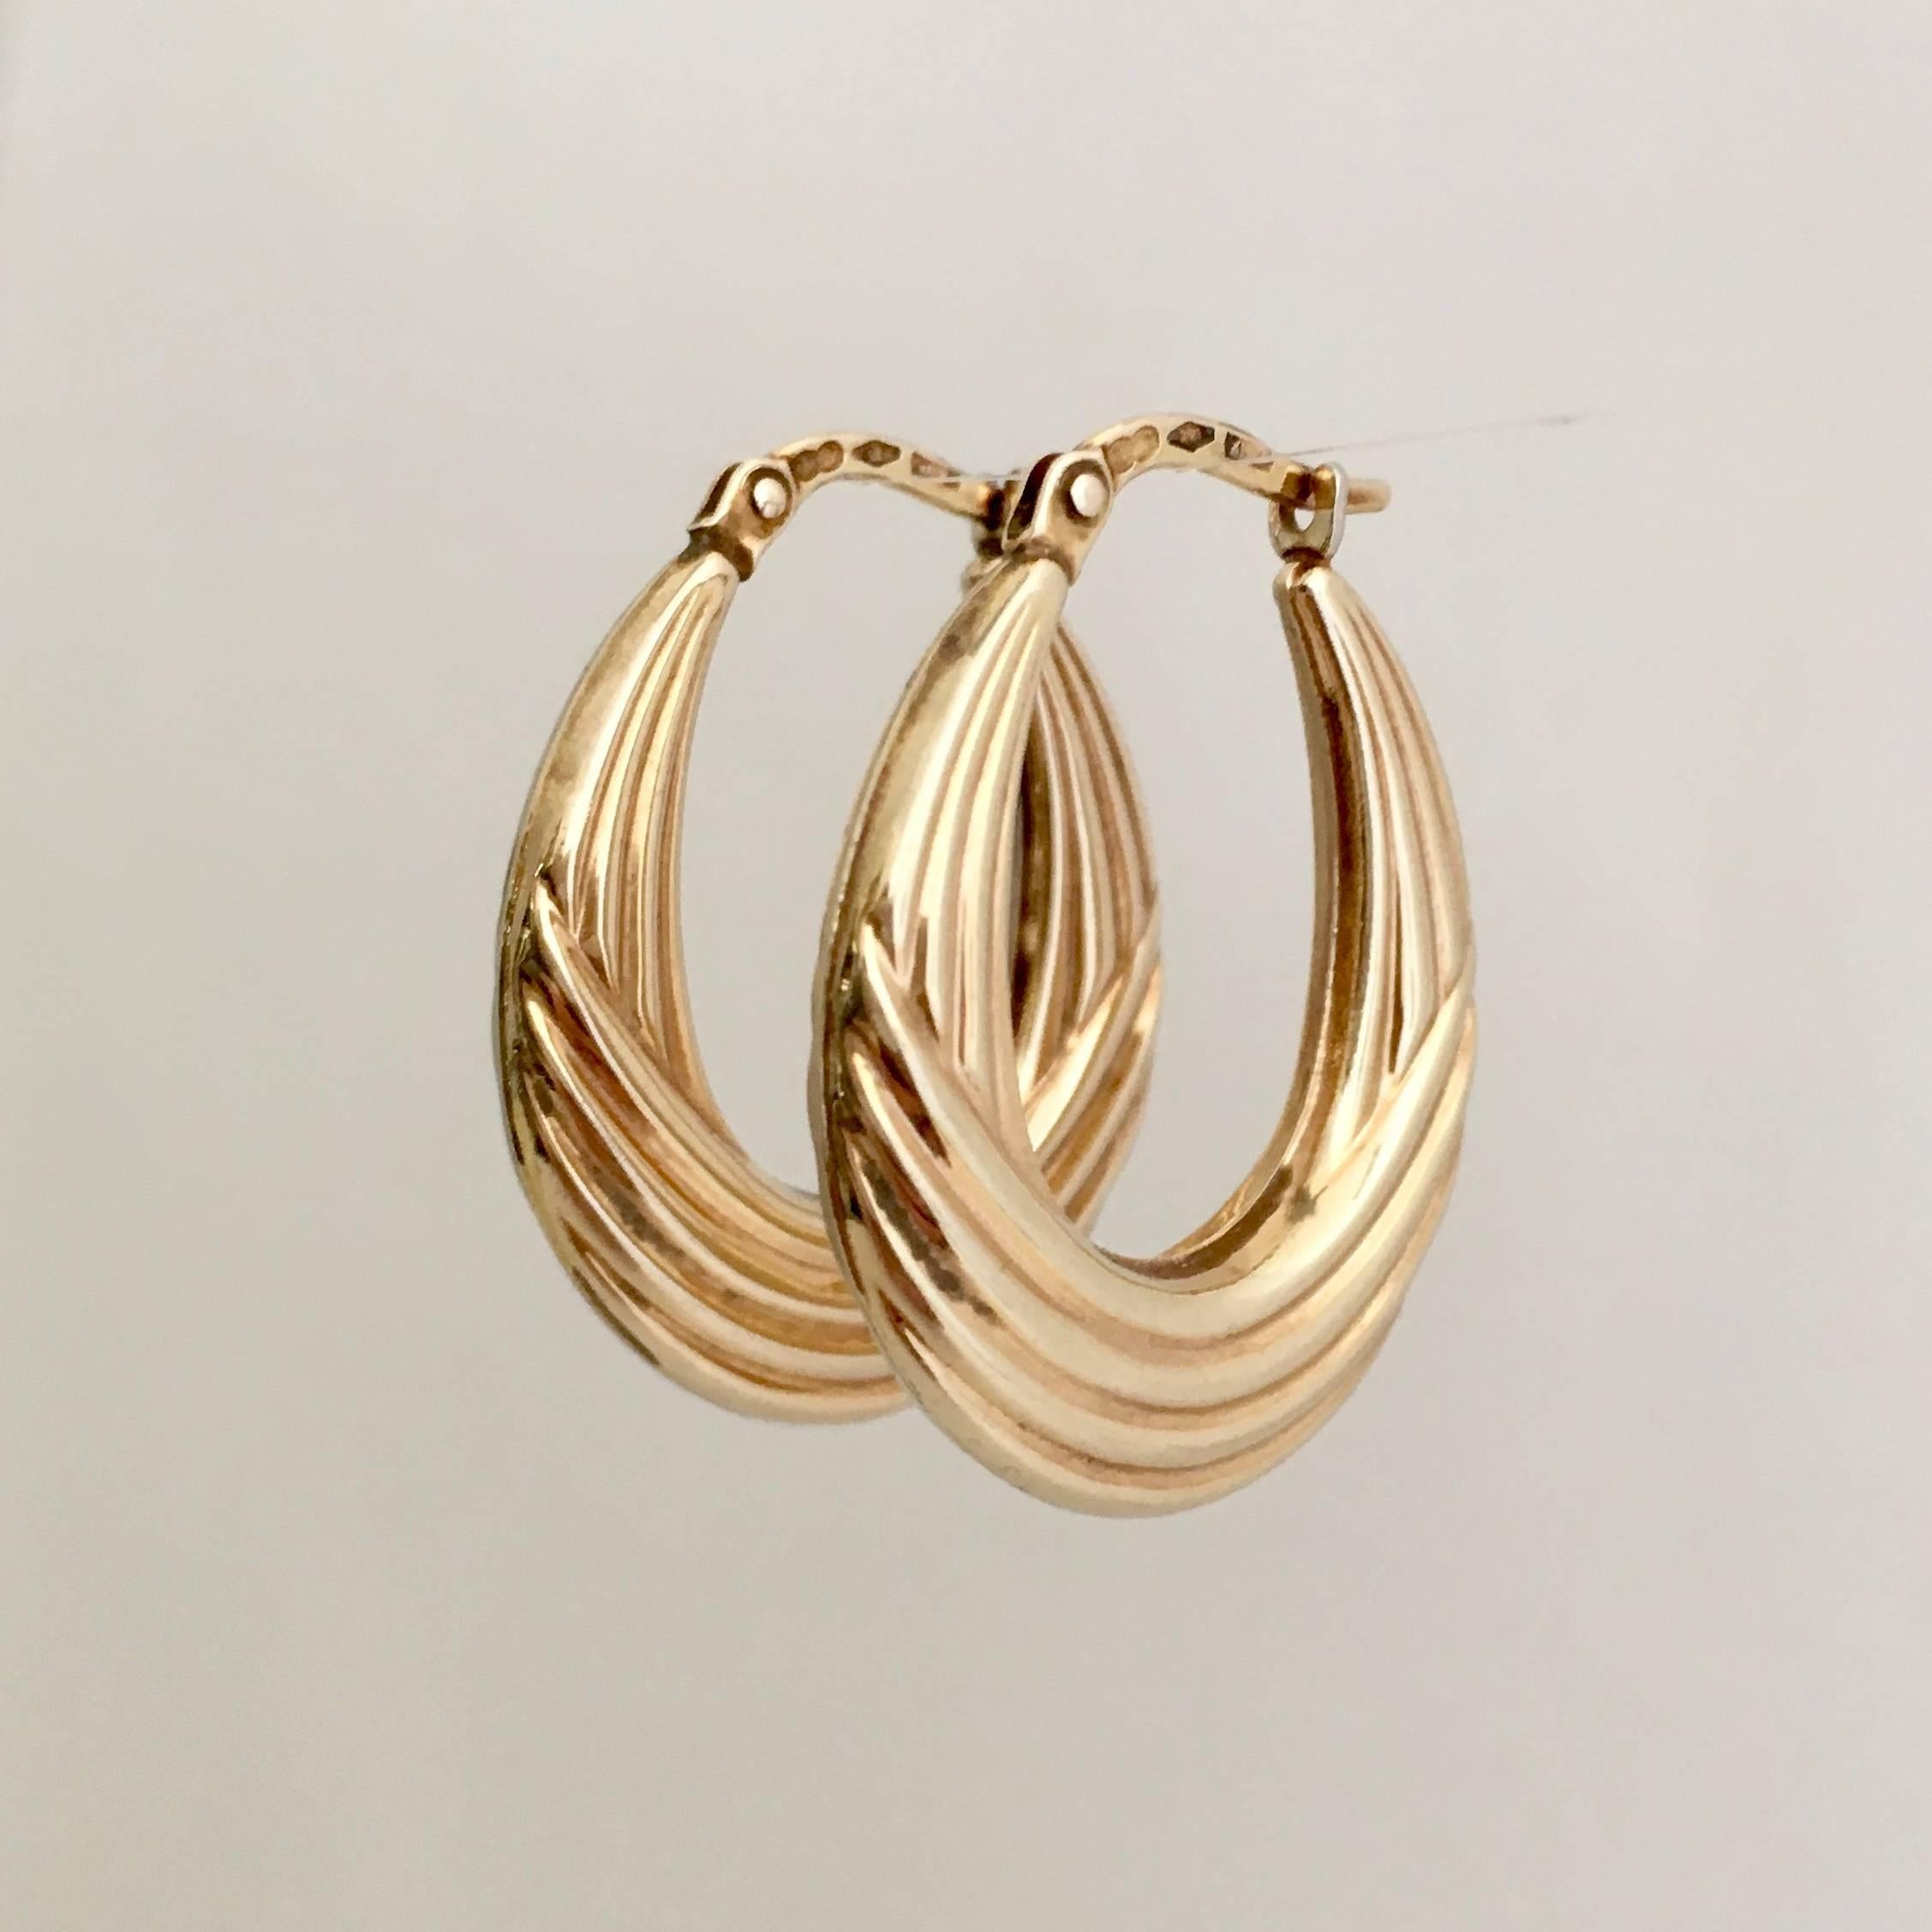 An incredibly stylish and smart pair of vintage 9ct gold hoops with a moulded ribbed design. They are a useful, everyday size at 2.8cm and they are hollow, so lightweight and wearable. The fastening clicks securely in place. 

